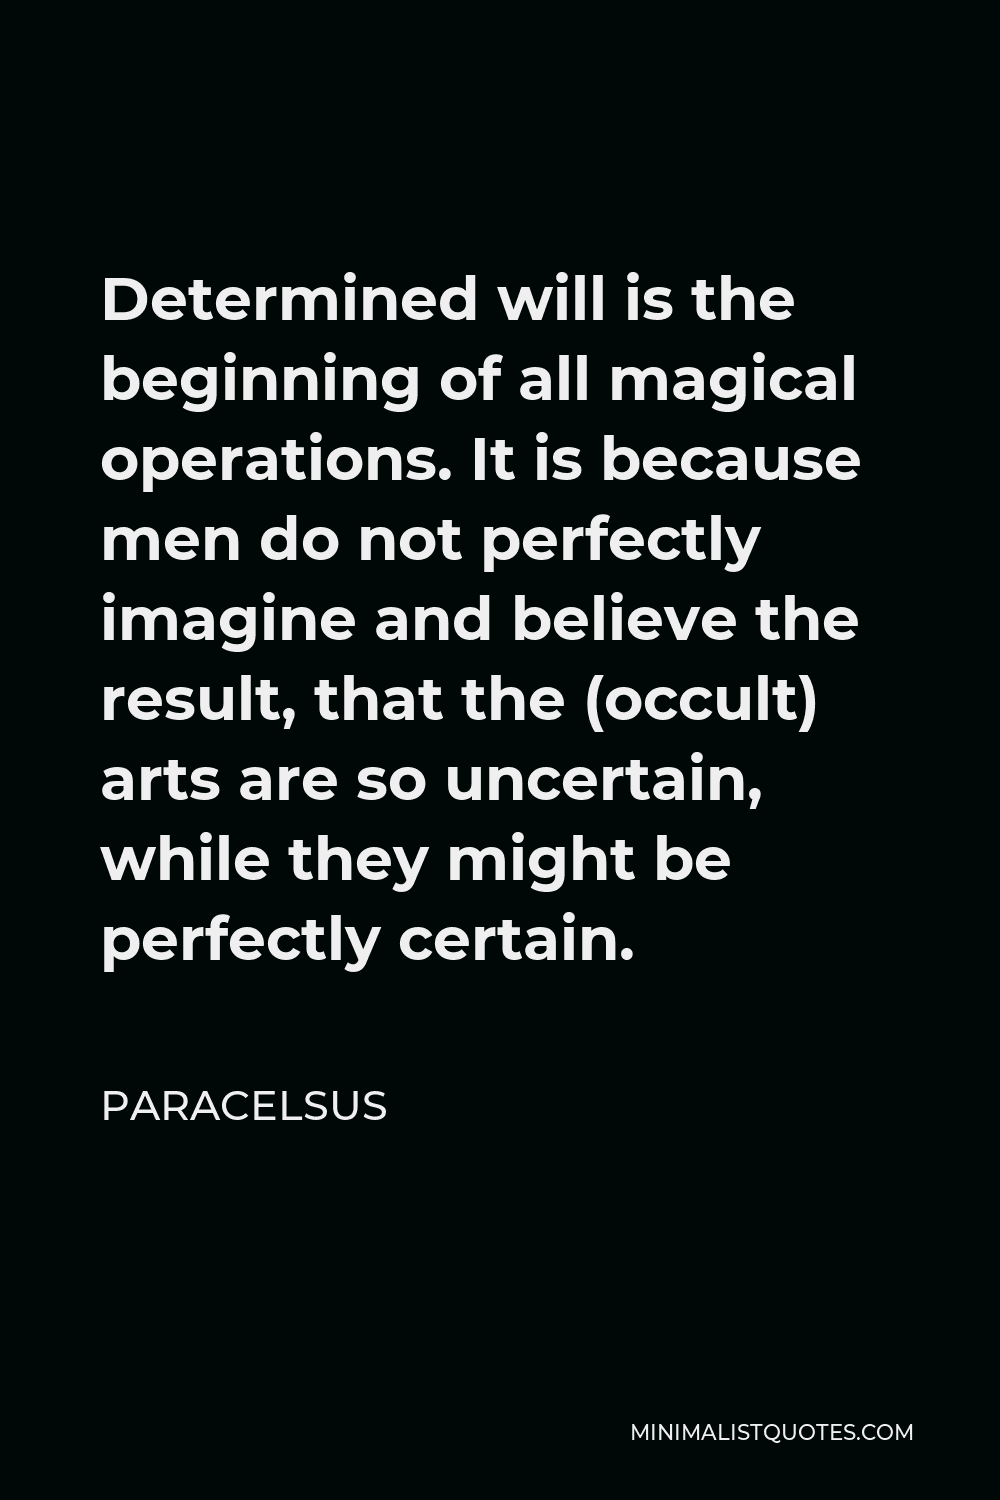 Paracelsus Quote - Determined will is the beginning of all magical operations. It is because men do not perfectly imagine and believe the result, that the (occult) arts are so uncertain, while they might be perfectly certain.